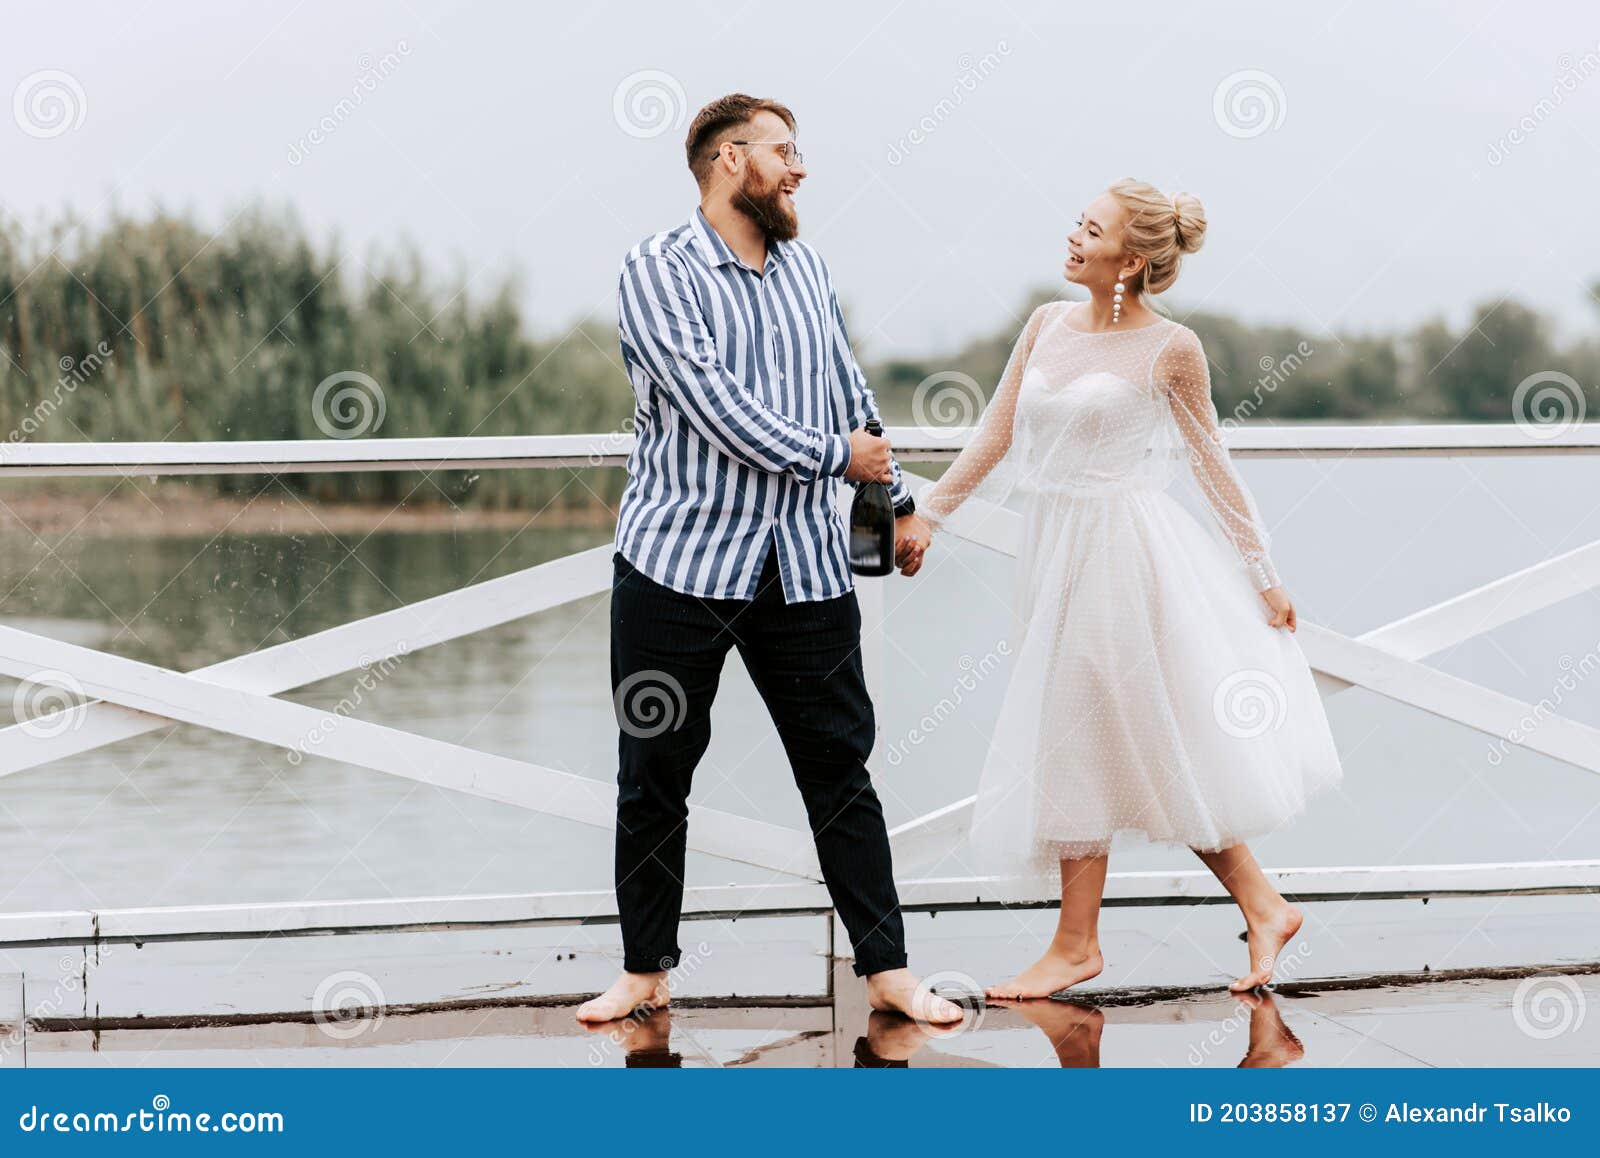 Beautiful Just Married Dance Barefoot And Have Fun On The Pier By The Water Stock Image Image 